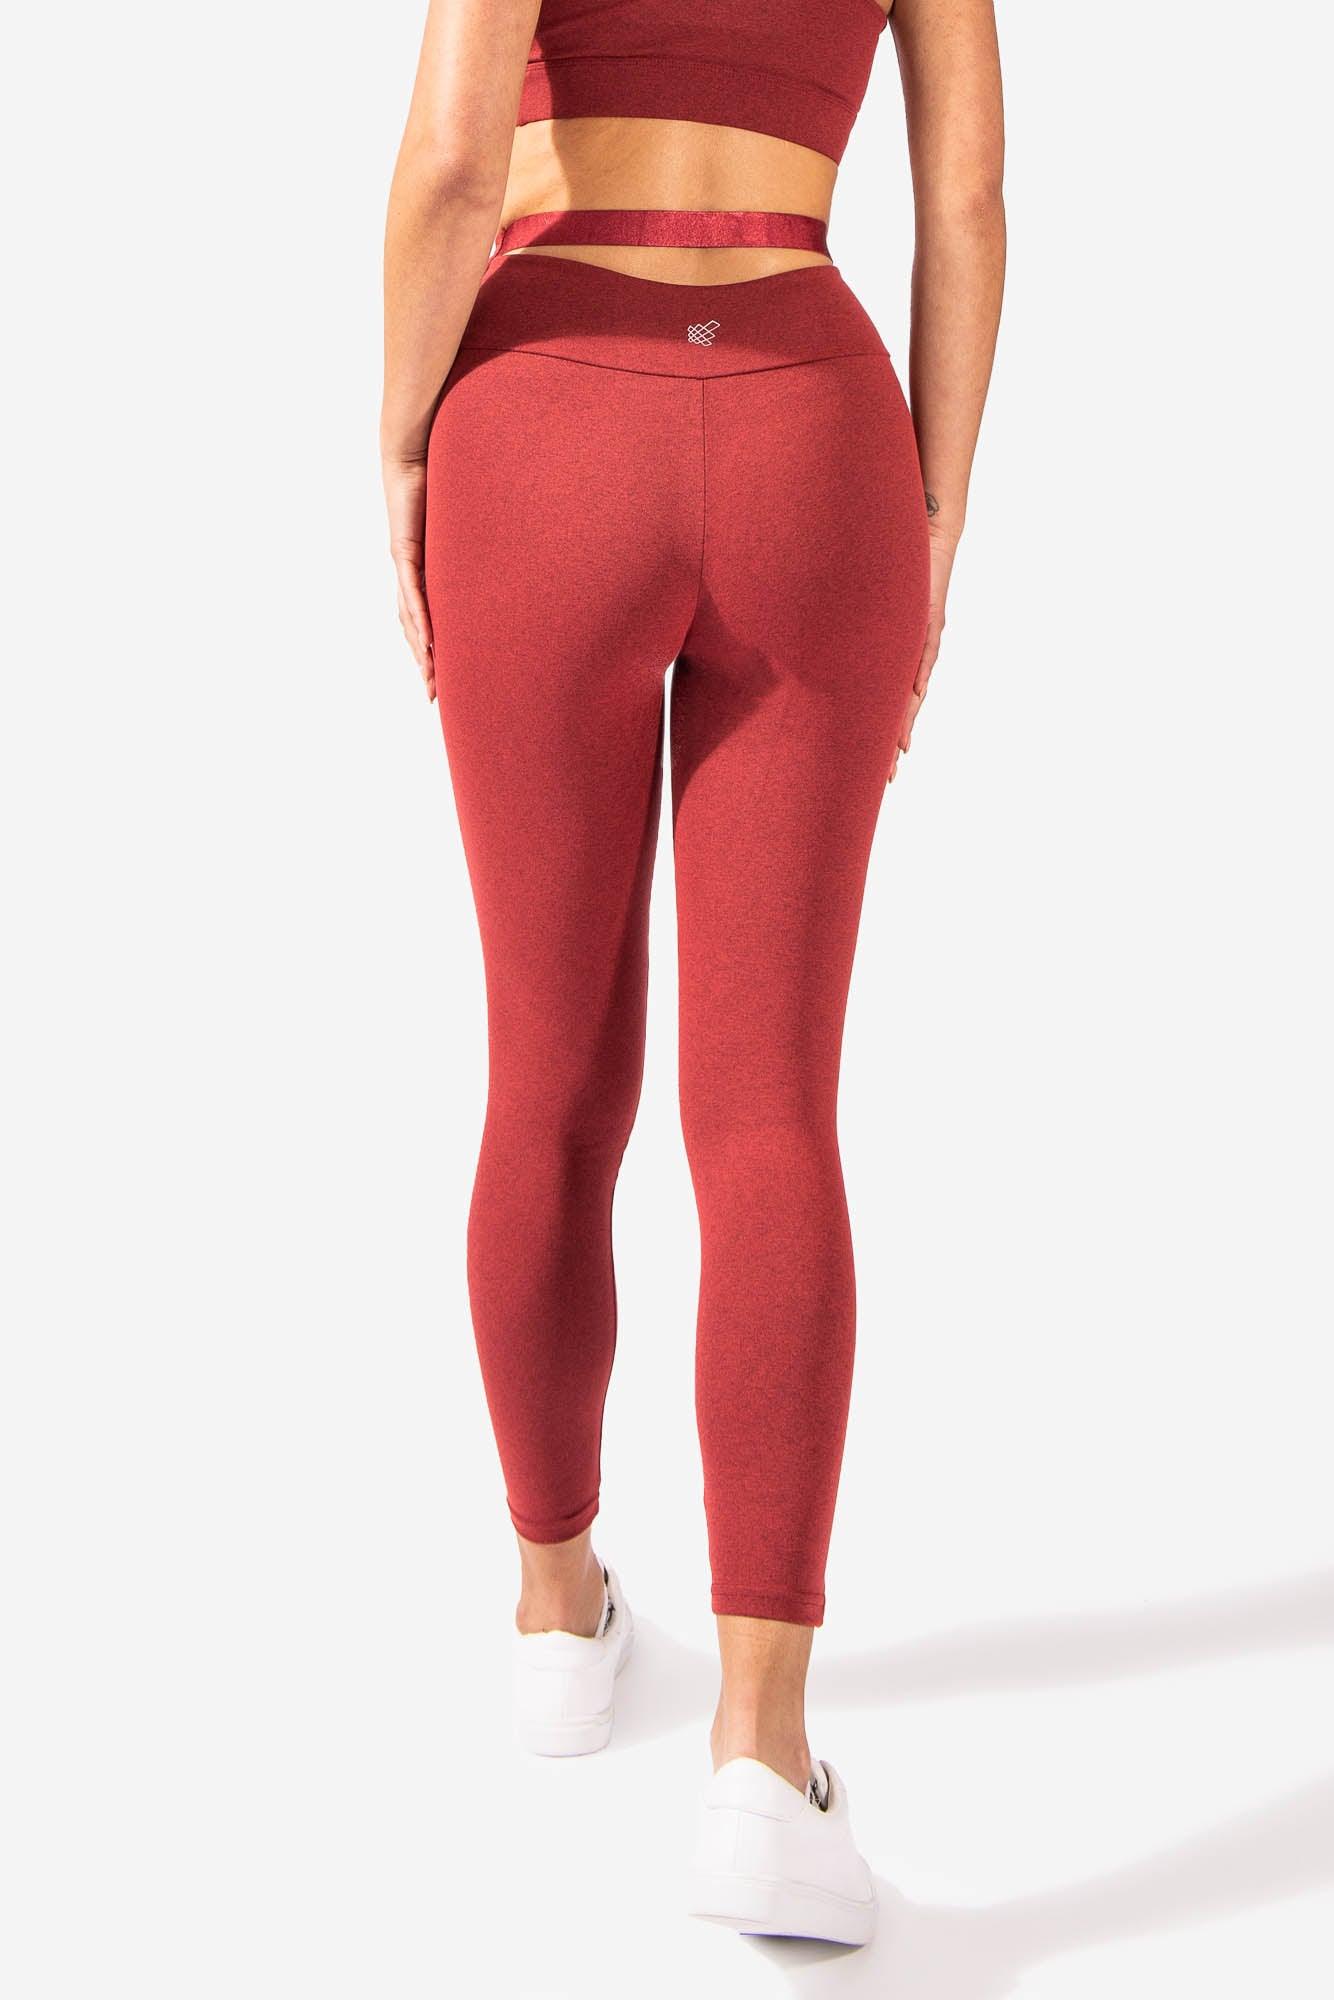 NWT Style & Co Petite Red size XS Pull On Leggings Made in USA.